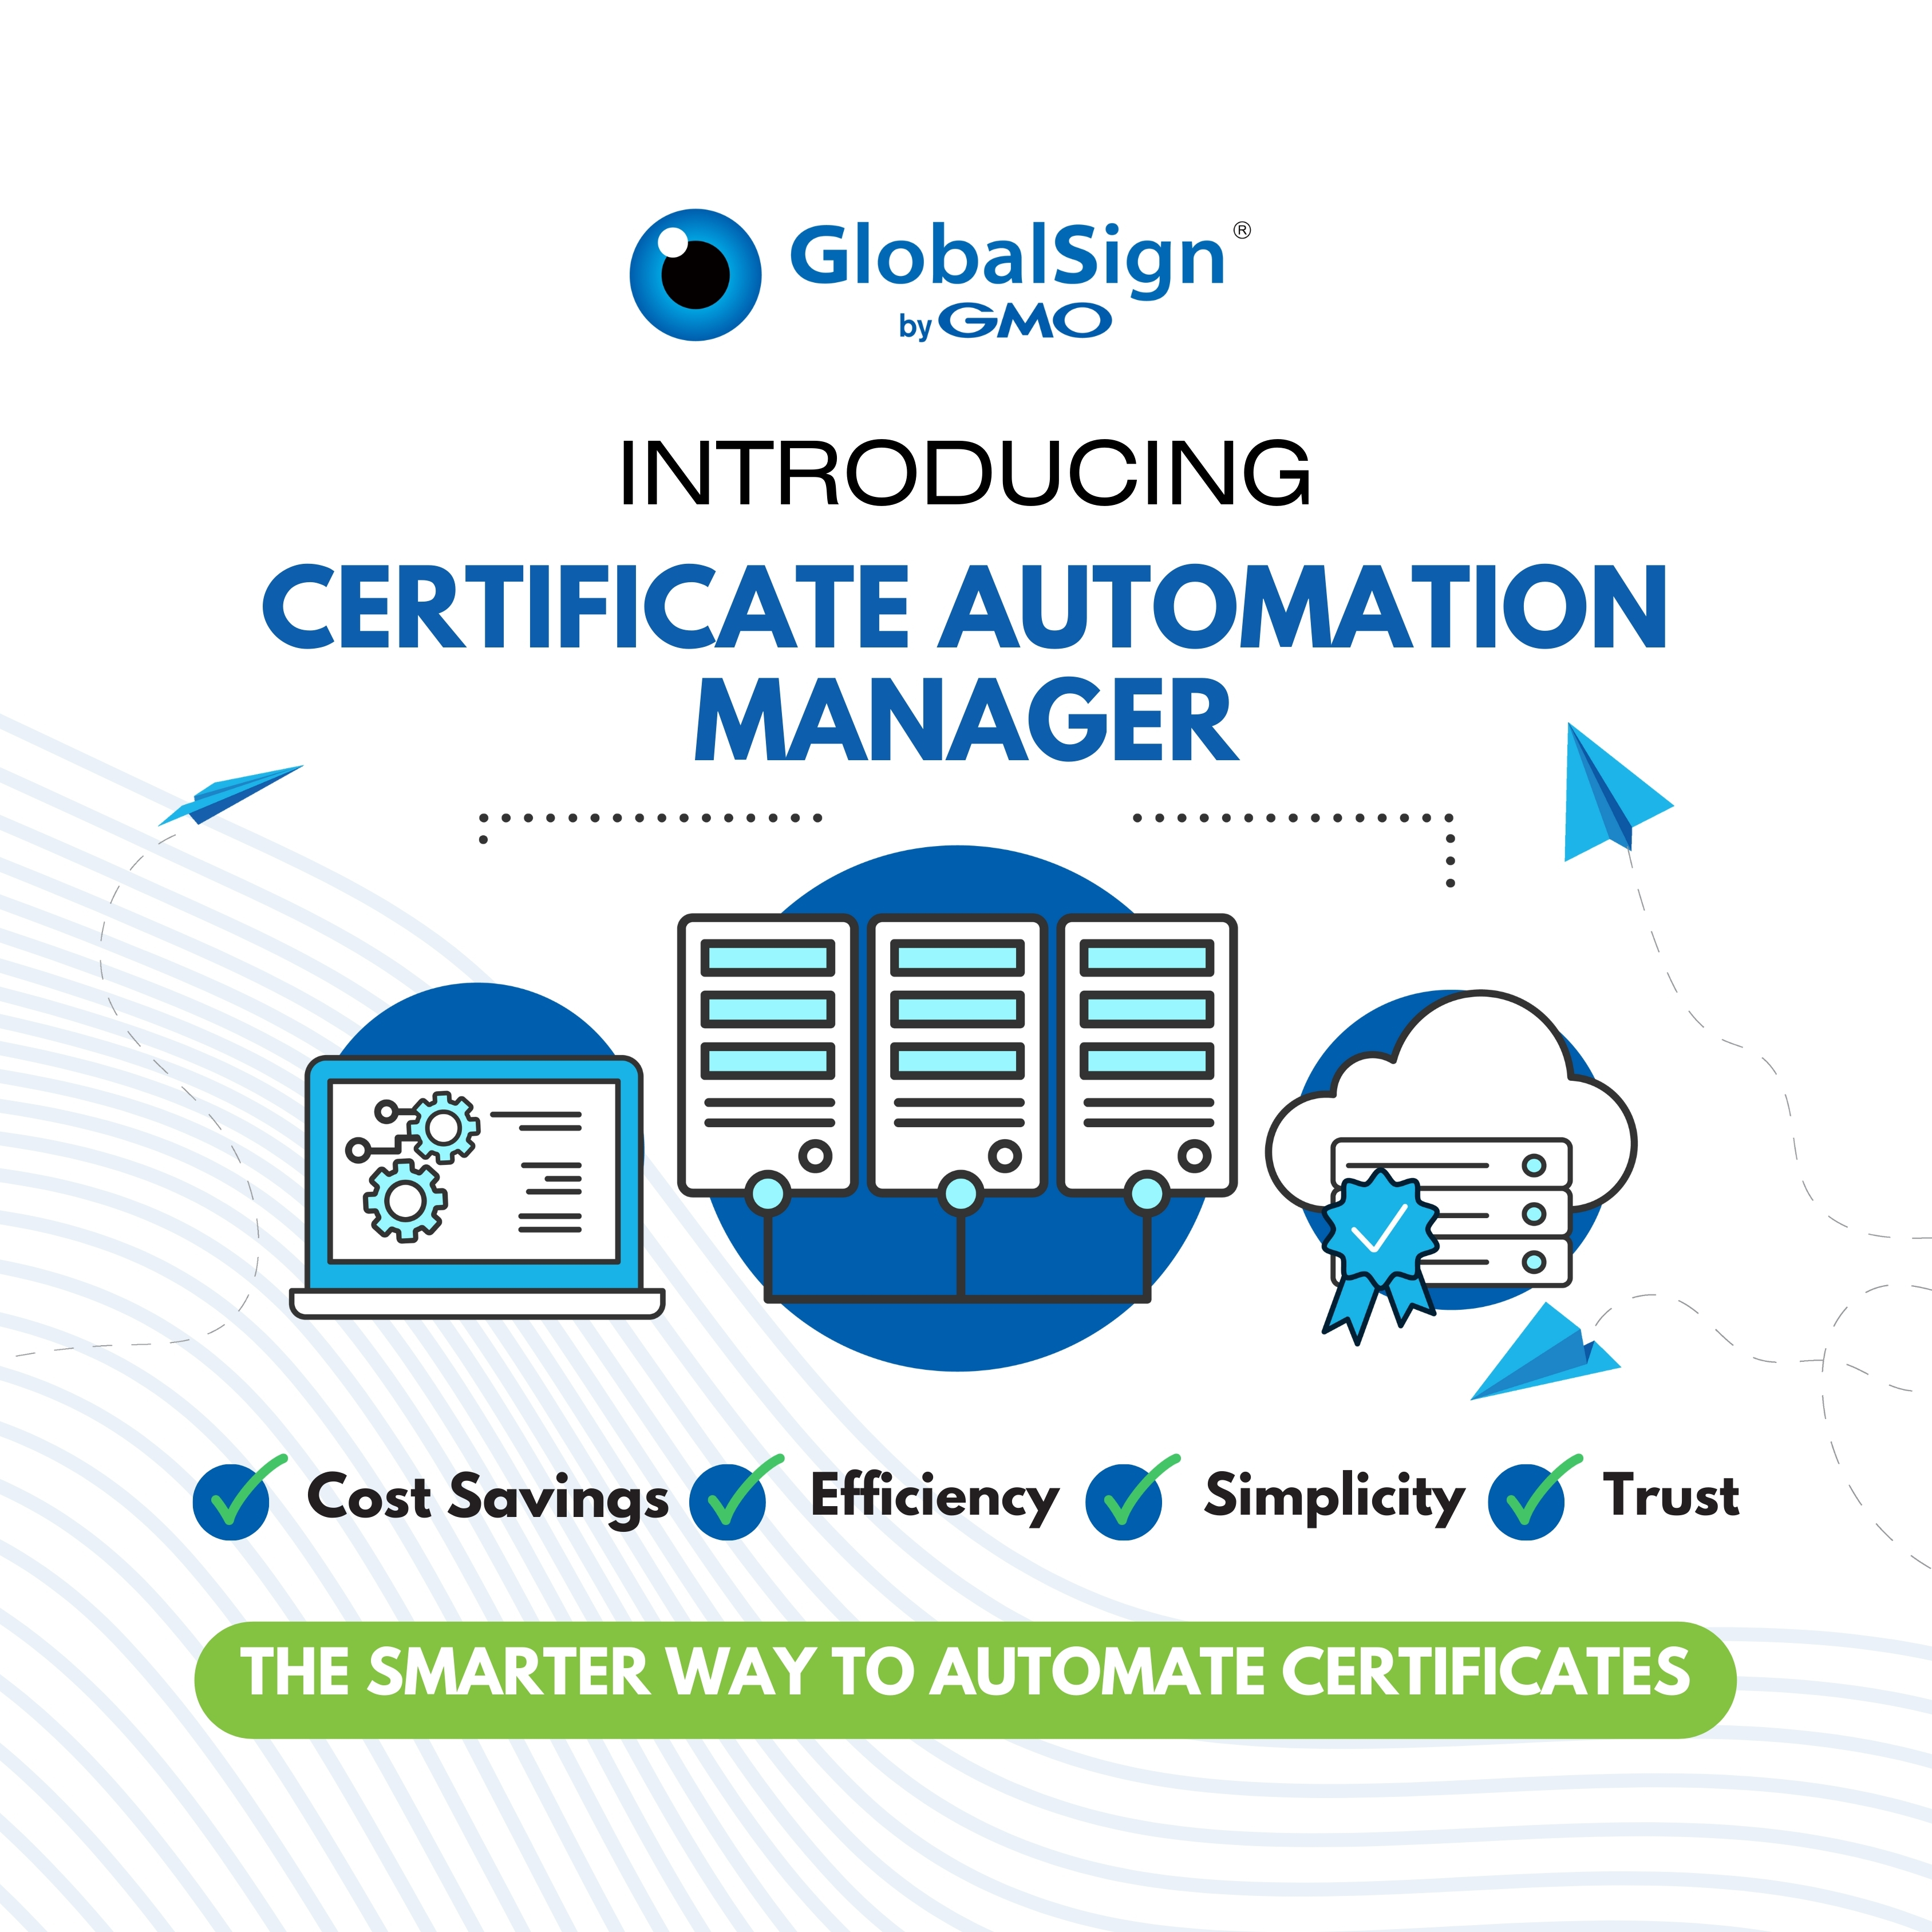 GMO GlobalSign Unveils Certificate Automation Manager